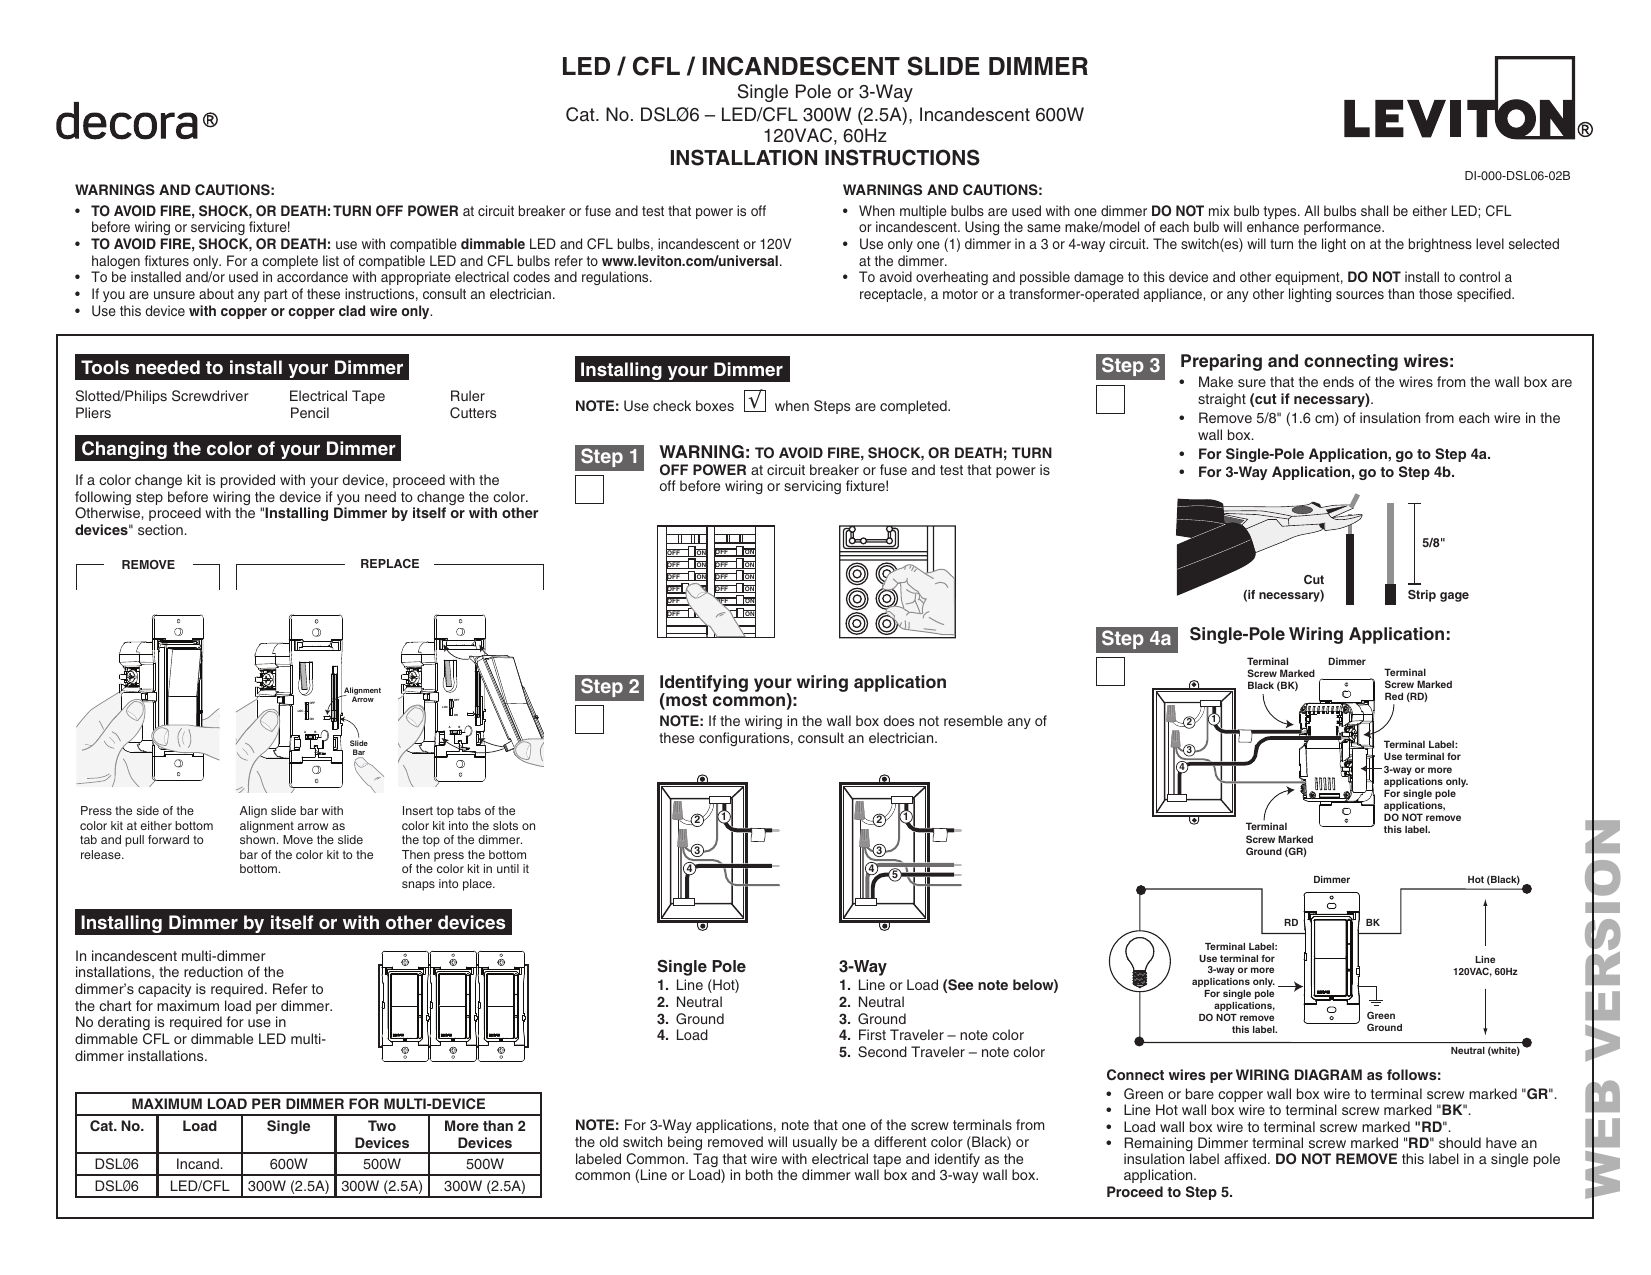 Leviton Sureslide Dimmer Wiring Diagram from s3.manualzz.com